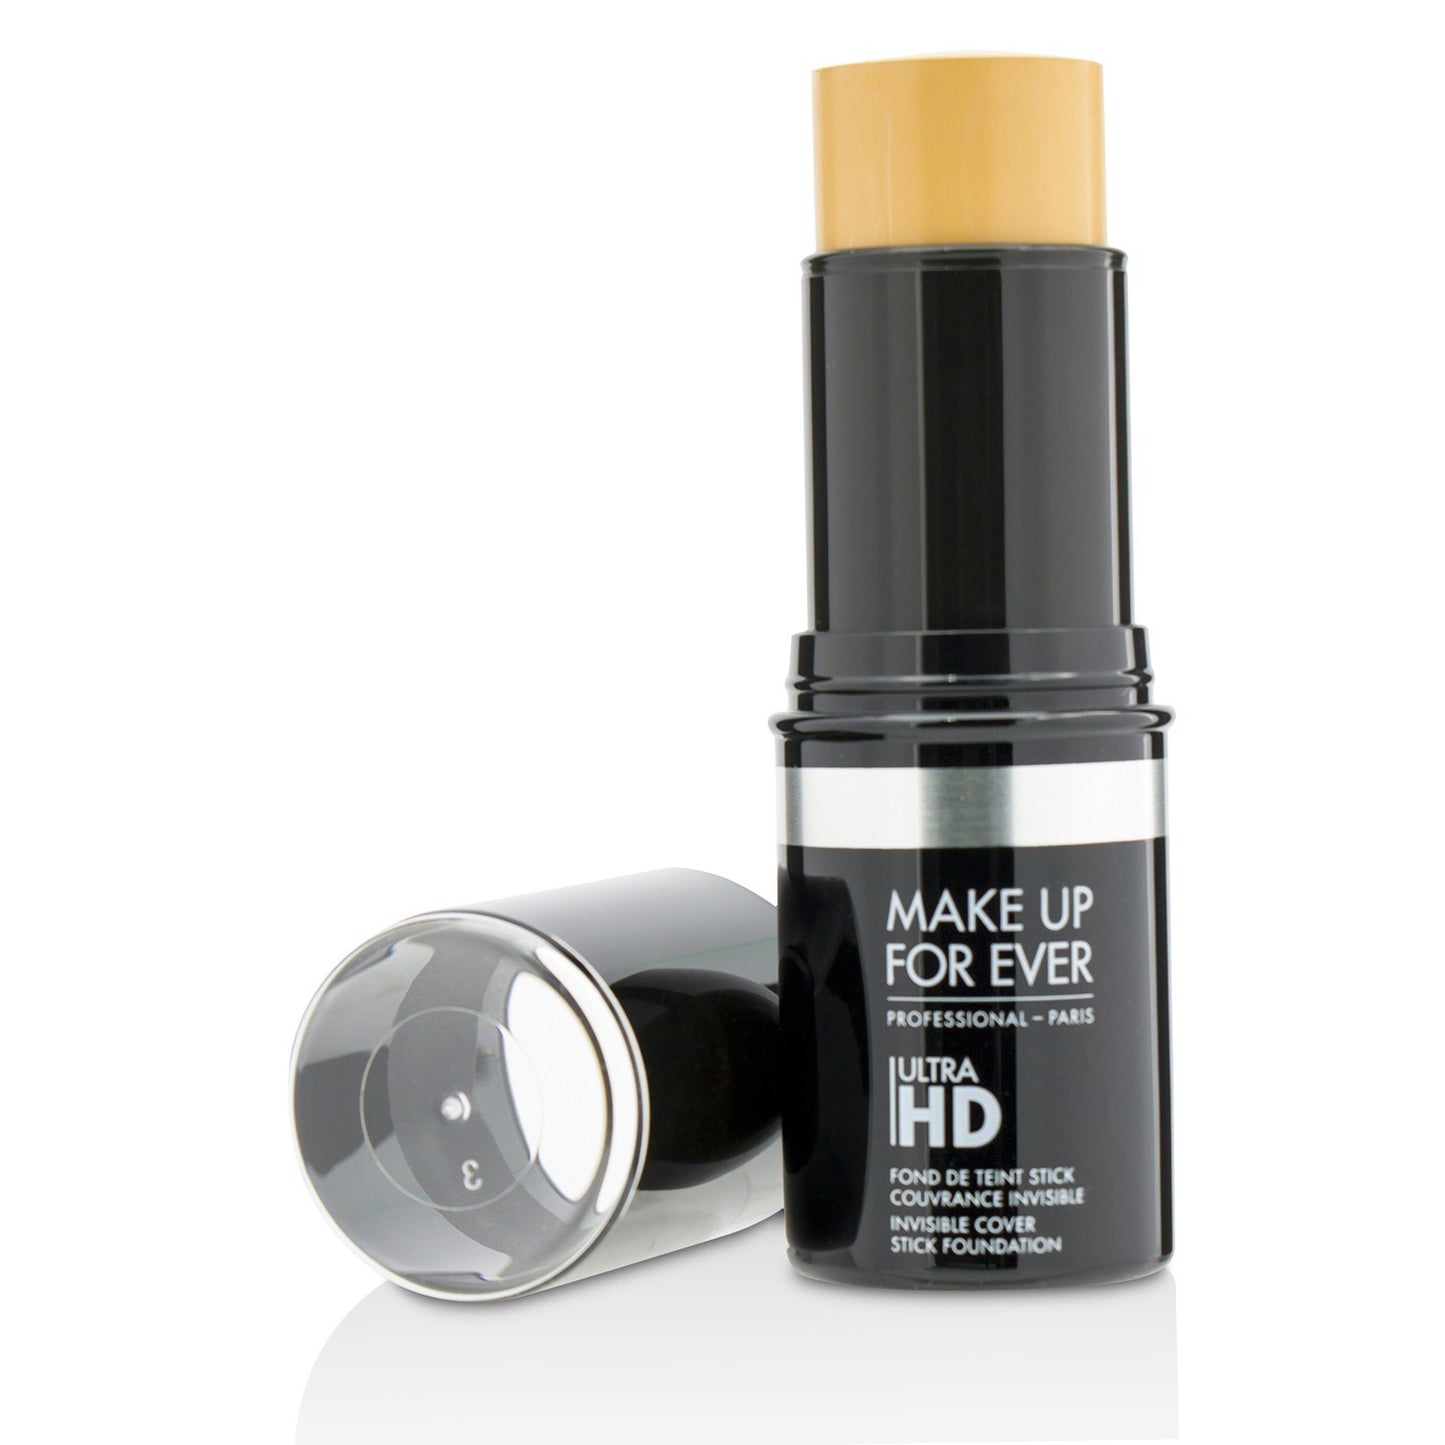 MAKE UP FOR EVER - Ultra HD Invisible Cover Stick Foundation - # 120/Y245 (Soft Sand) 42245 12.5g/0.44oz